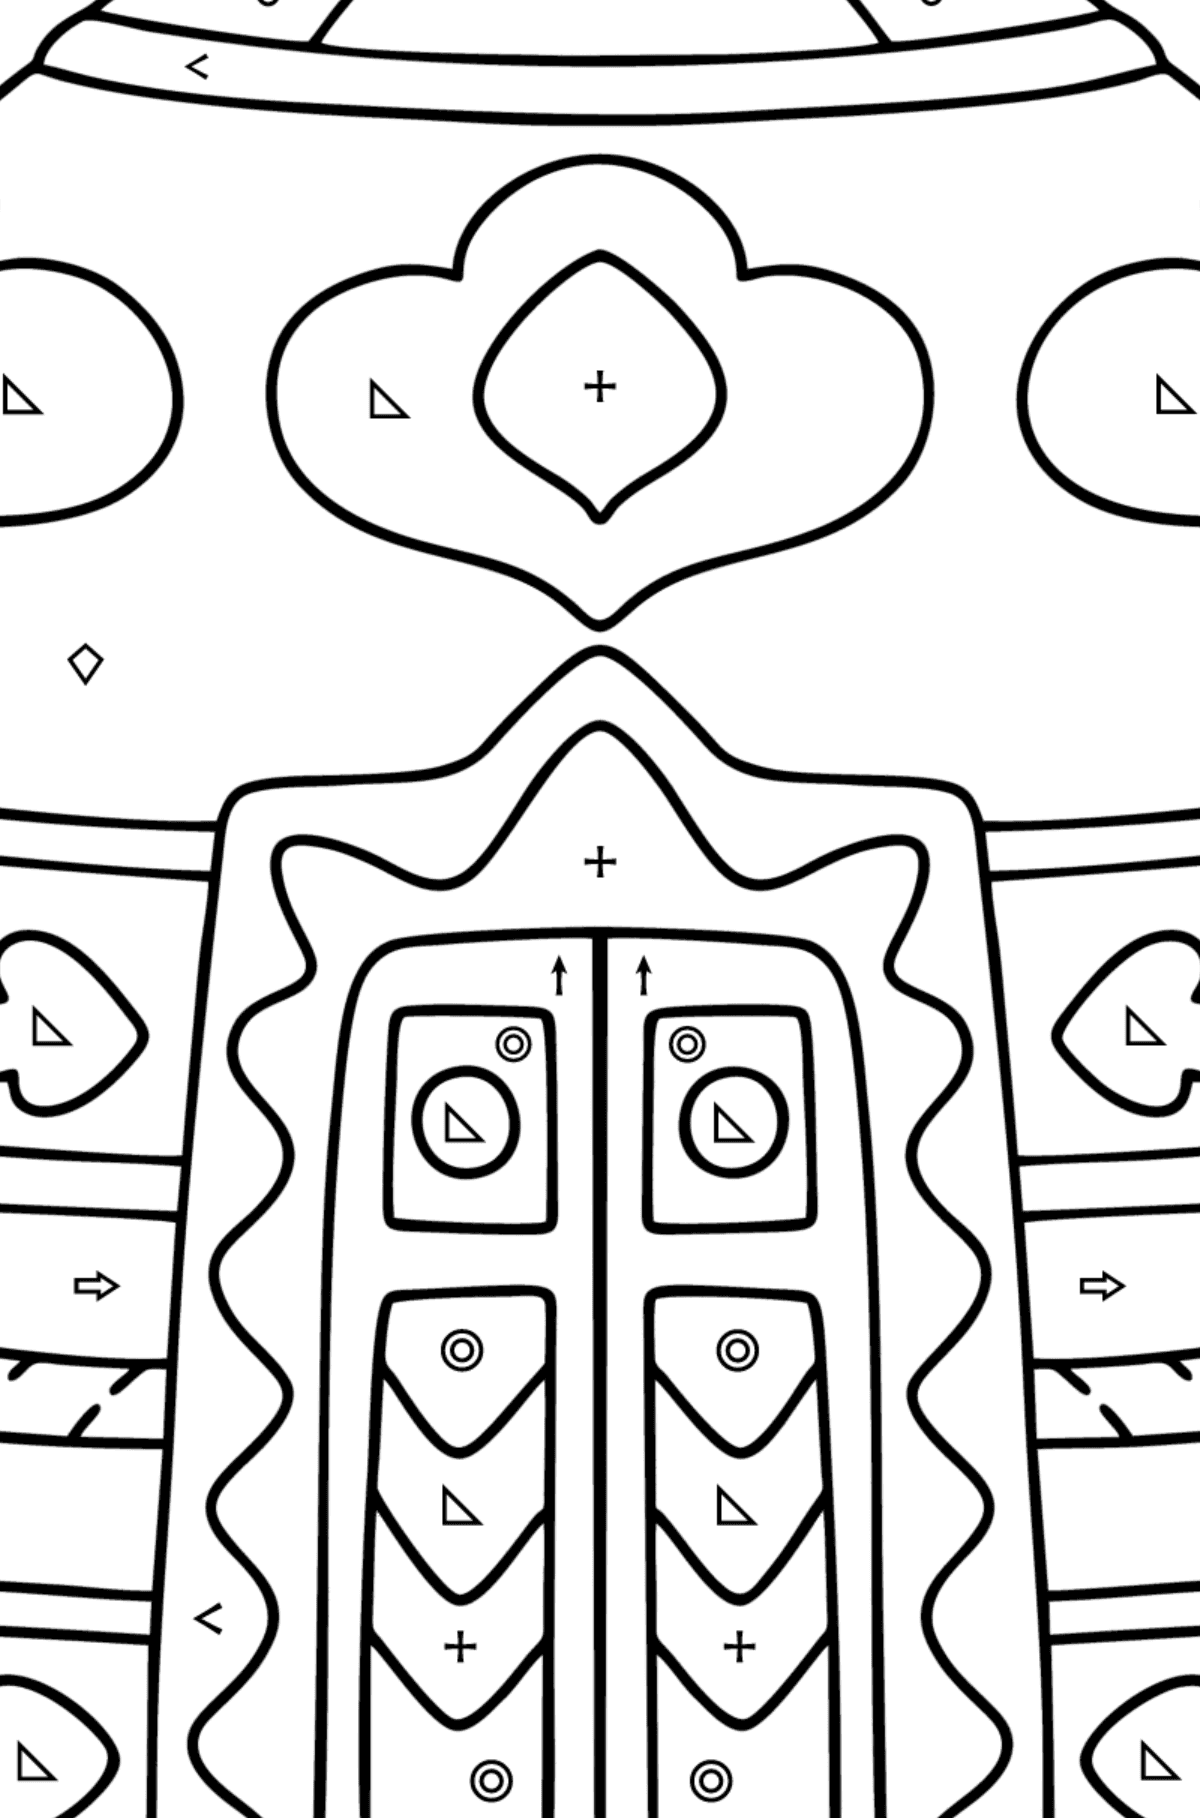 Yurt of nomad coloring page - Coloring by Symbols and Geometric Shapes for Kids